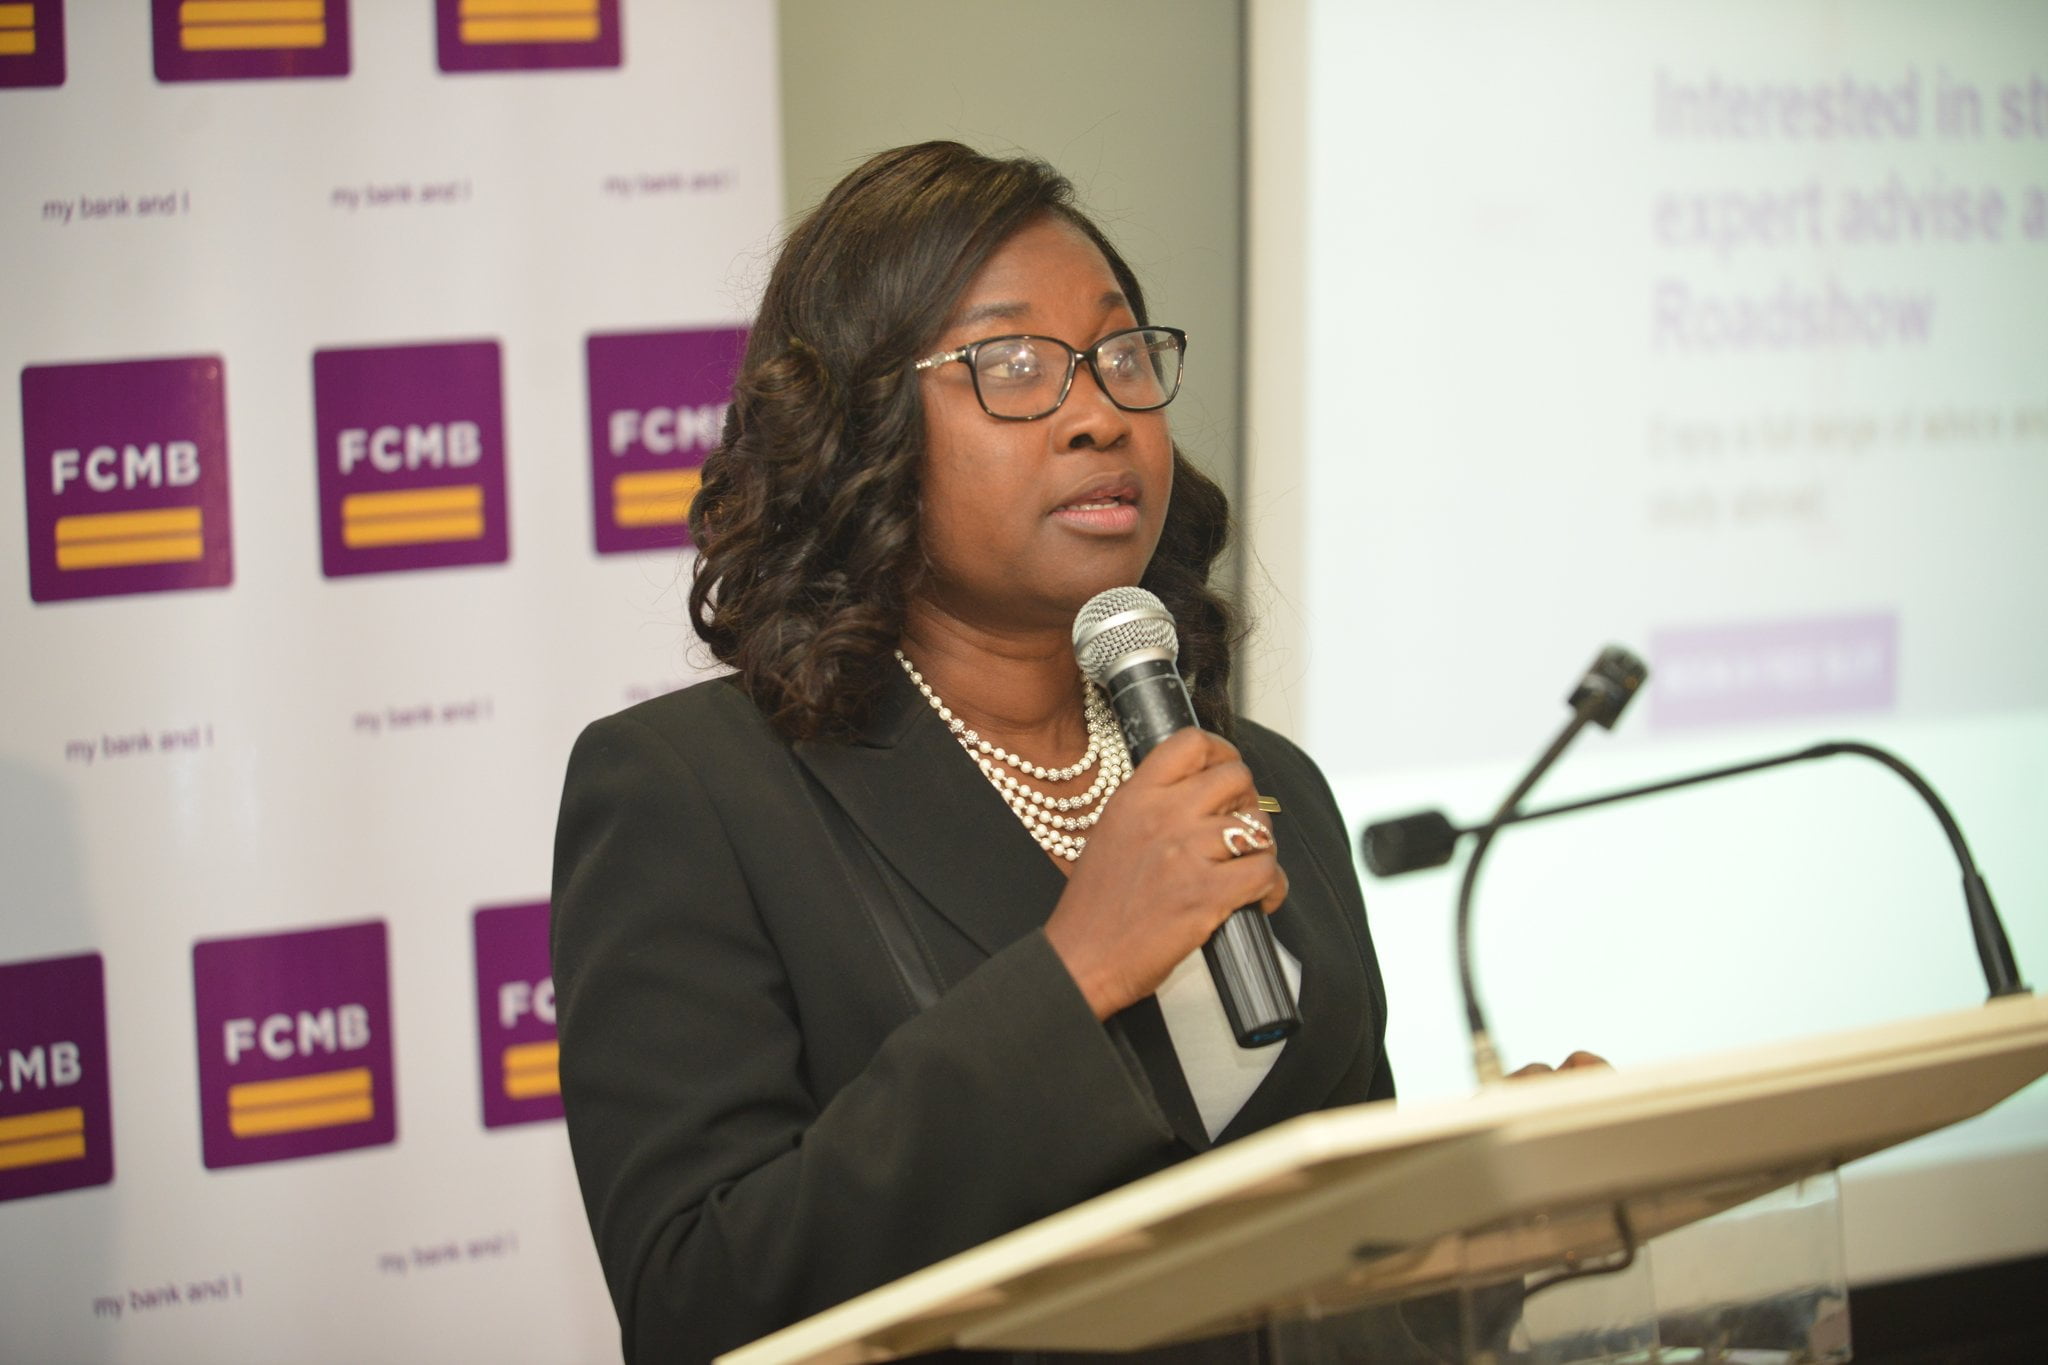 FCMB manager docked for committing over N1.2bn fraud